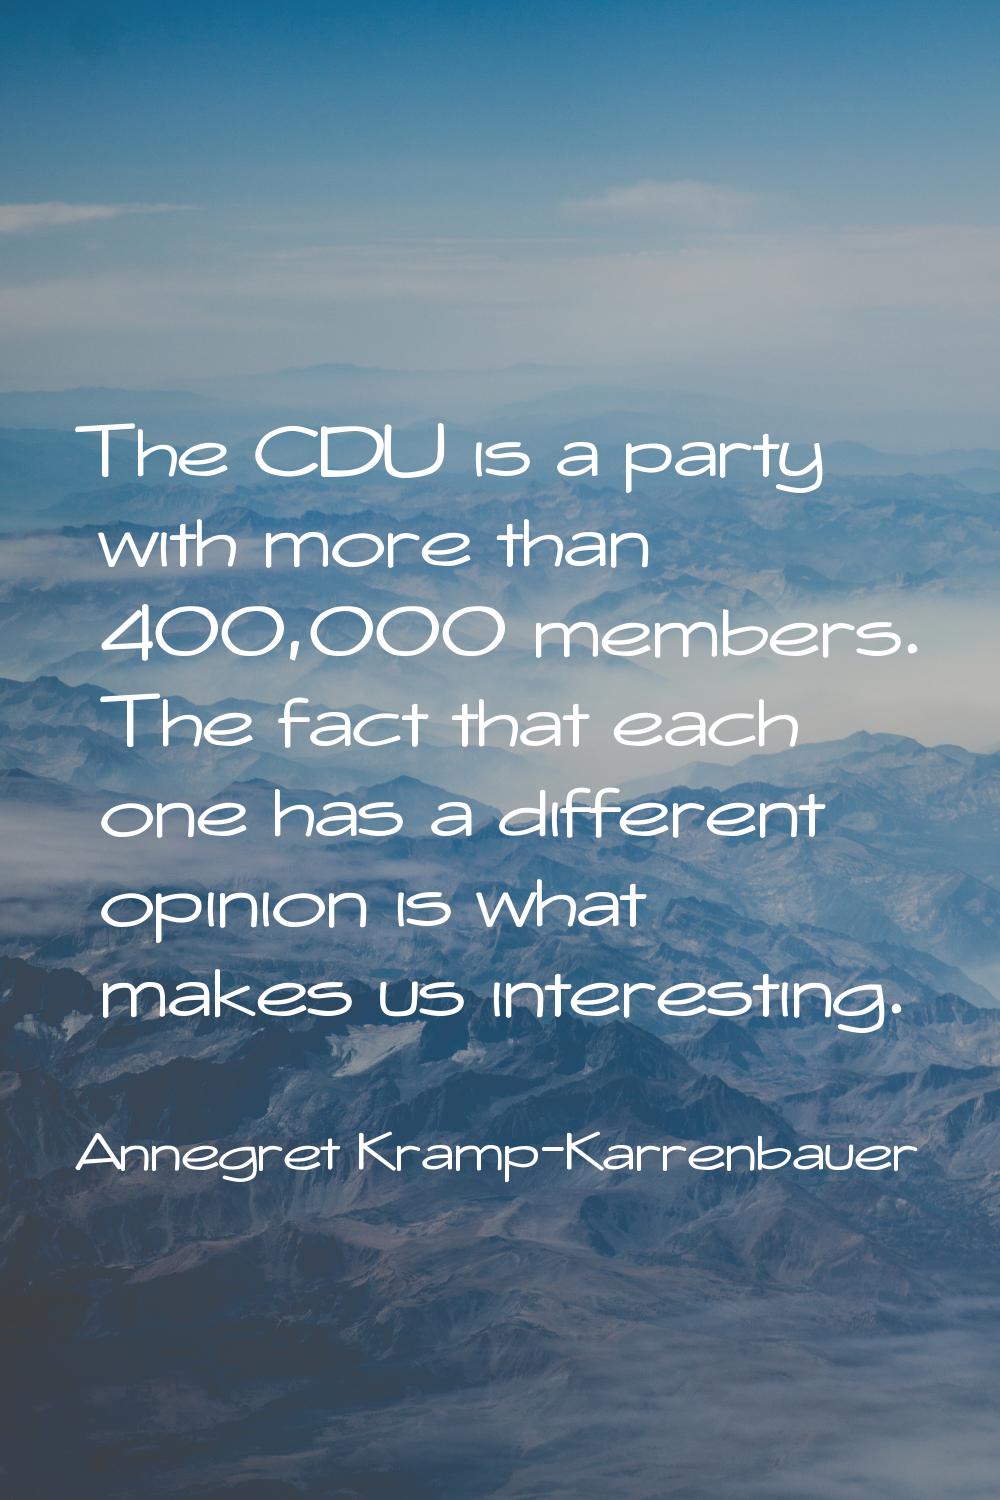 The CDU is a party with more than 400,000 members. The fact that each one has a different opinion i